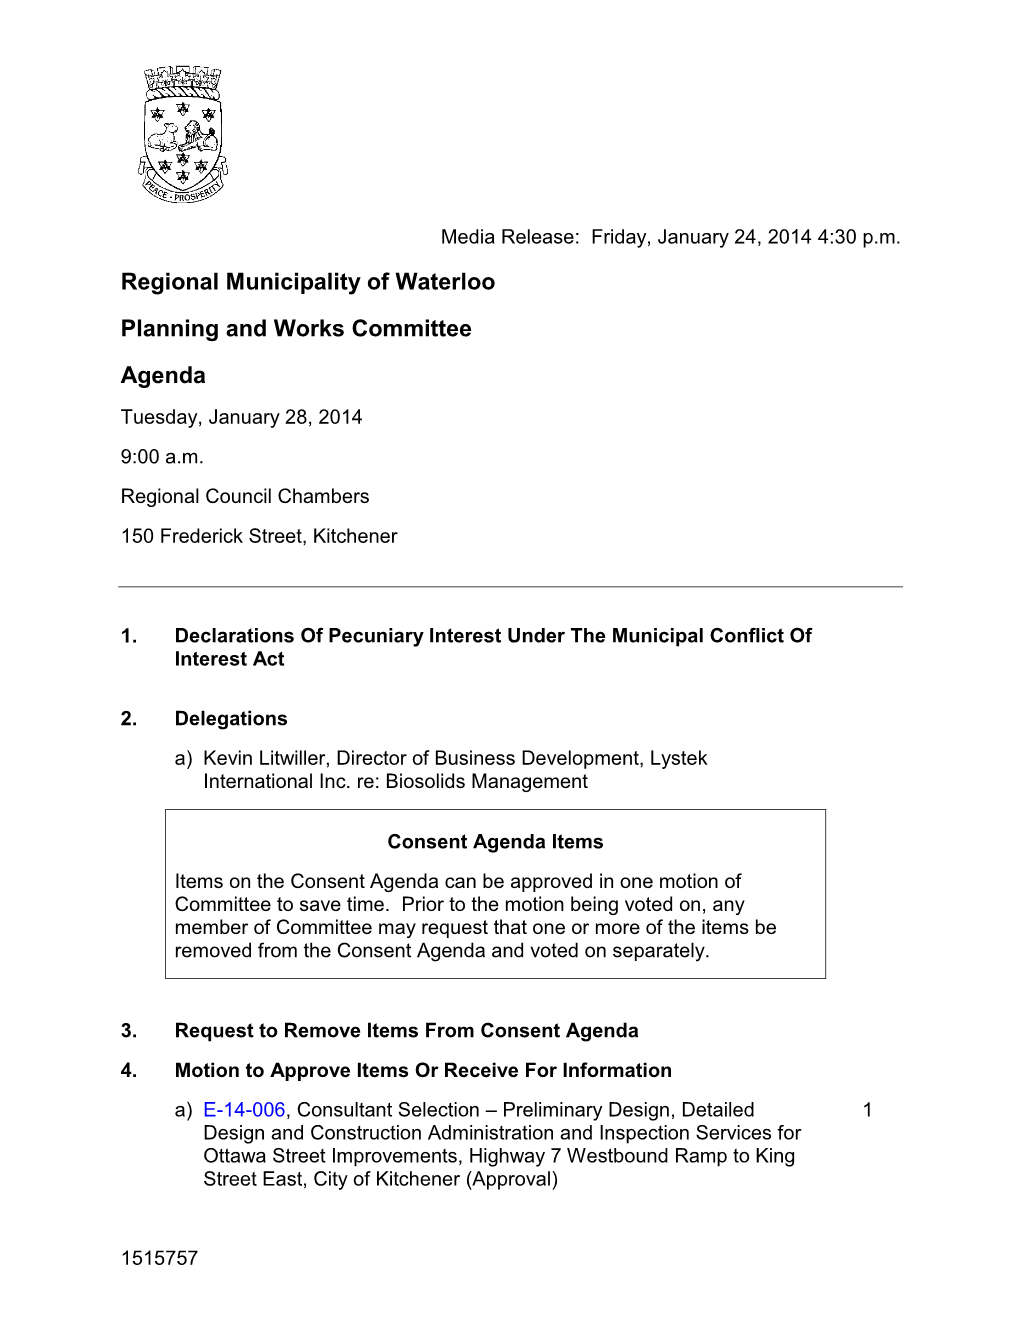 Planning and Works Committee Agenda